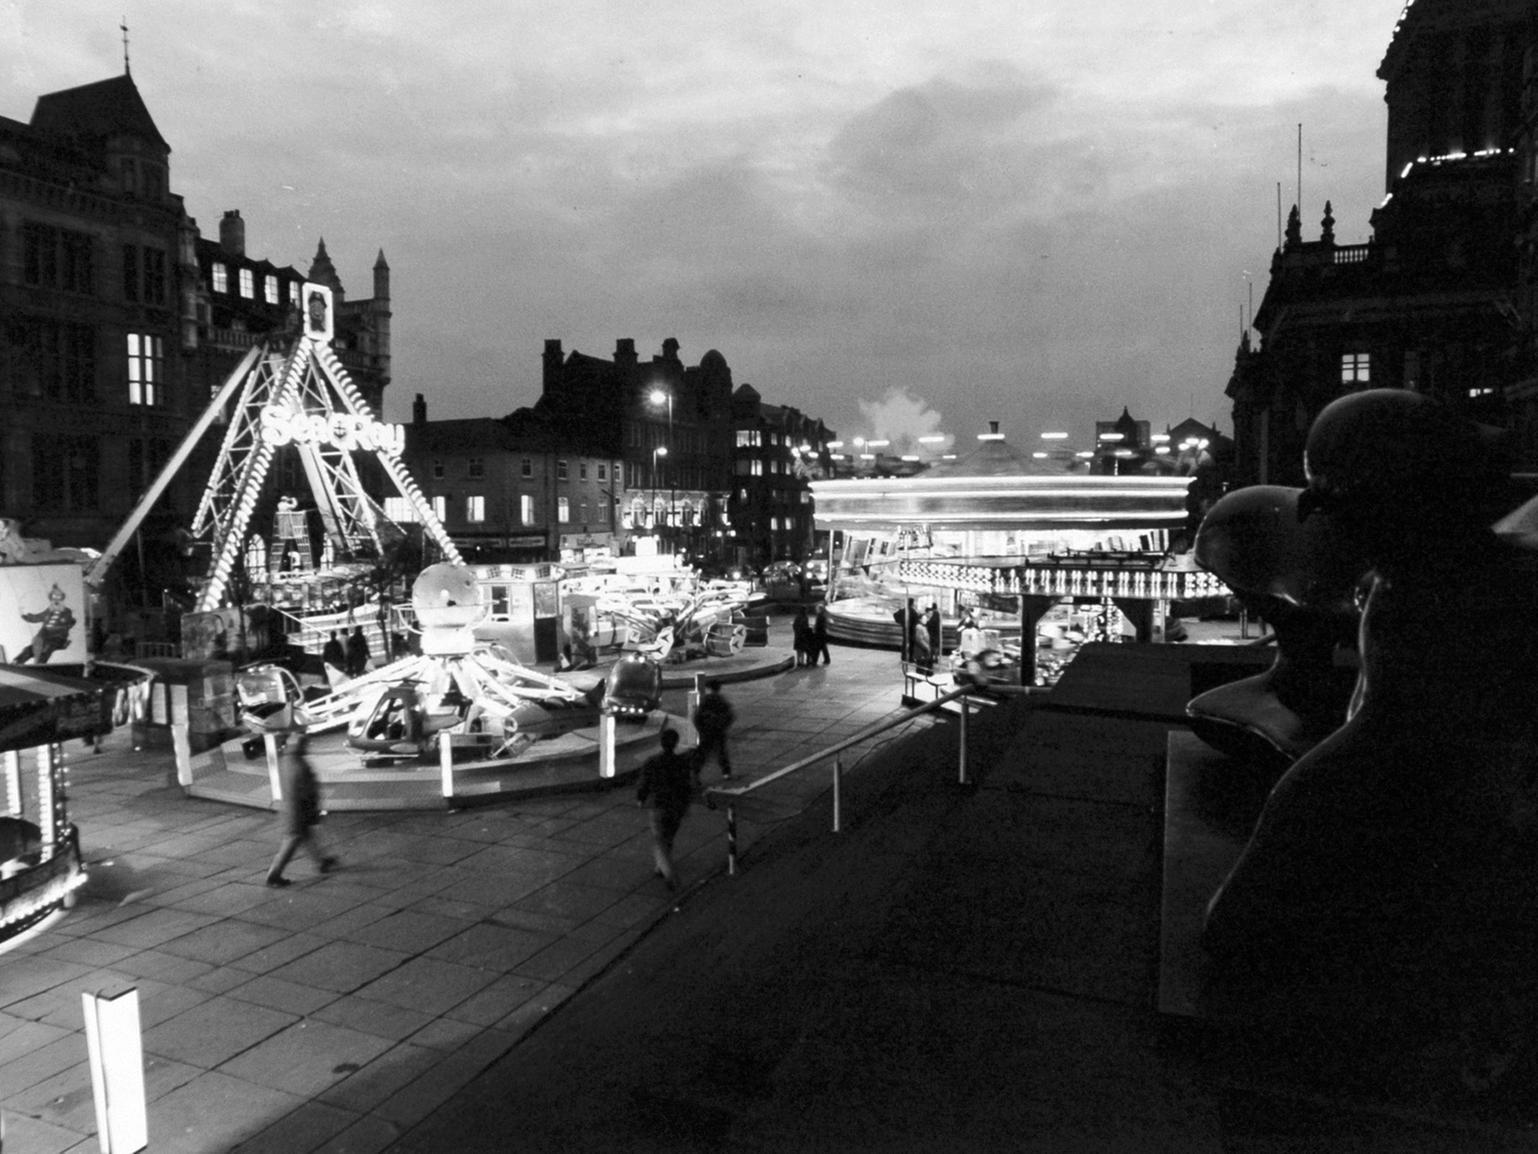 Do you remember when the St. Valentine's Fair was in Leeds city centre?